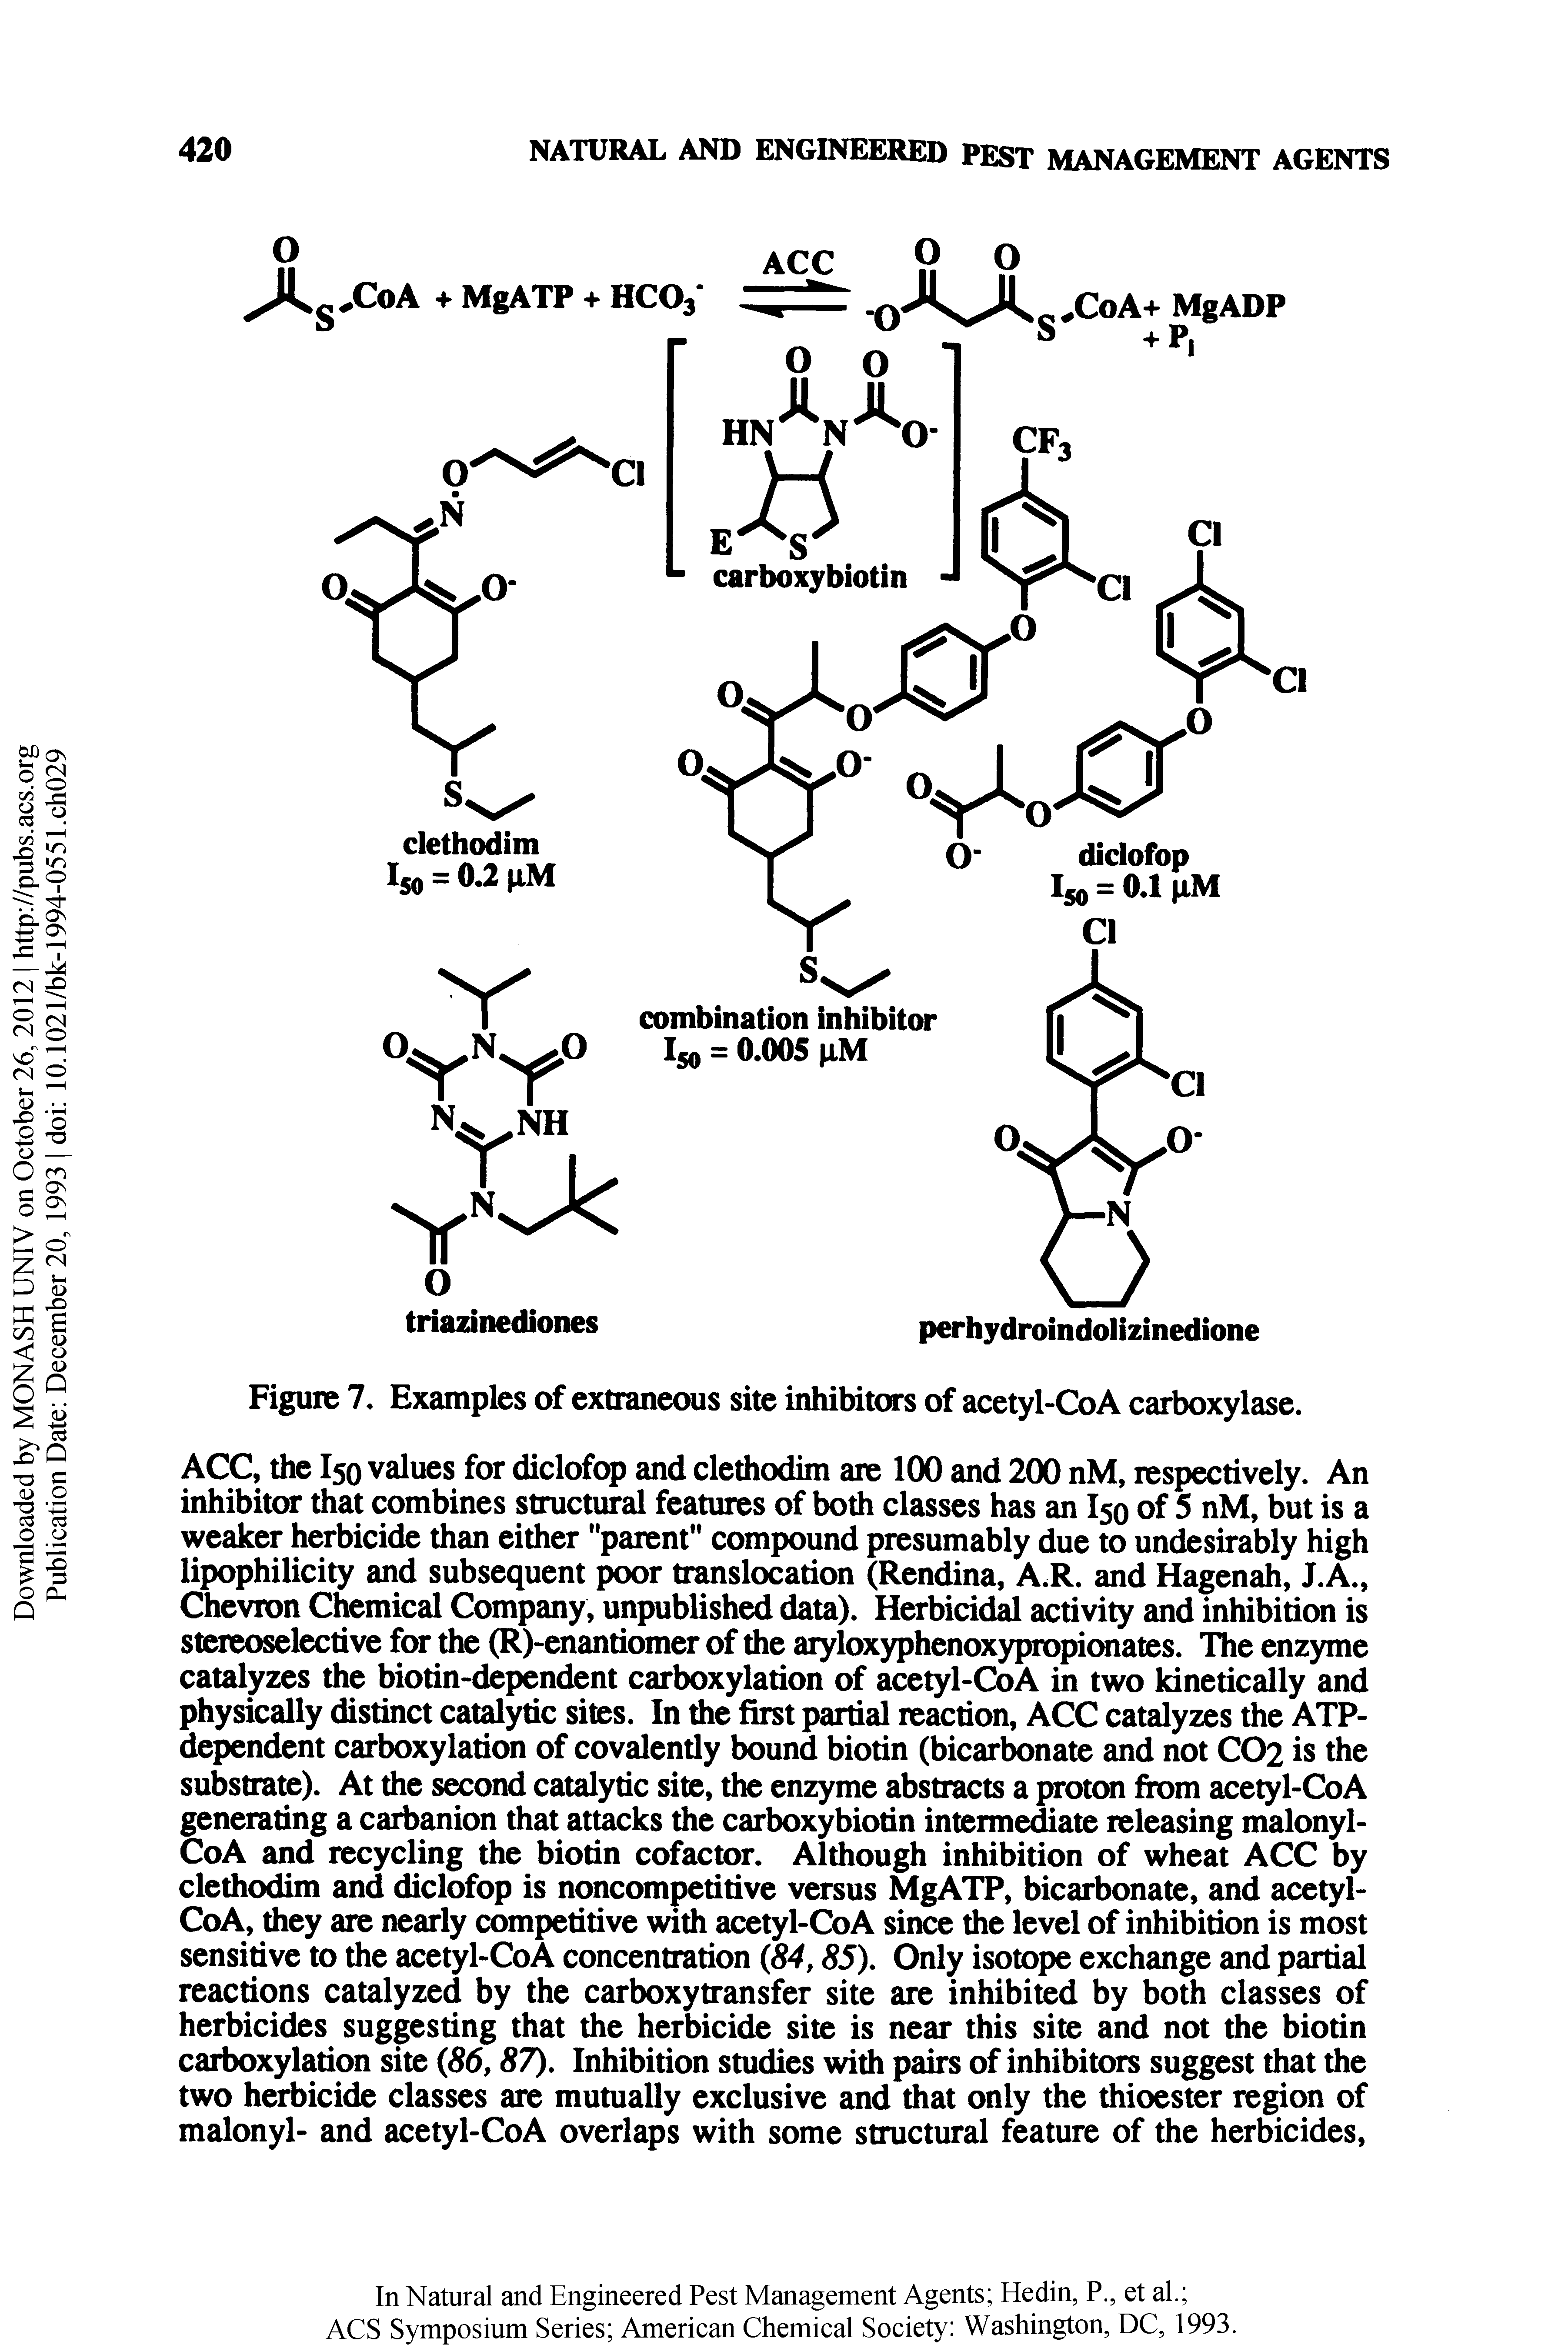 Figure 7, Examples of extraneous site inhibitors of acetyl-CoA carboxylase.